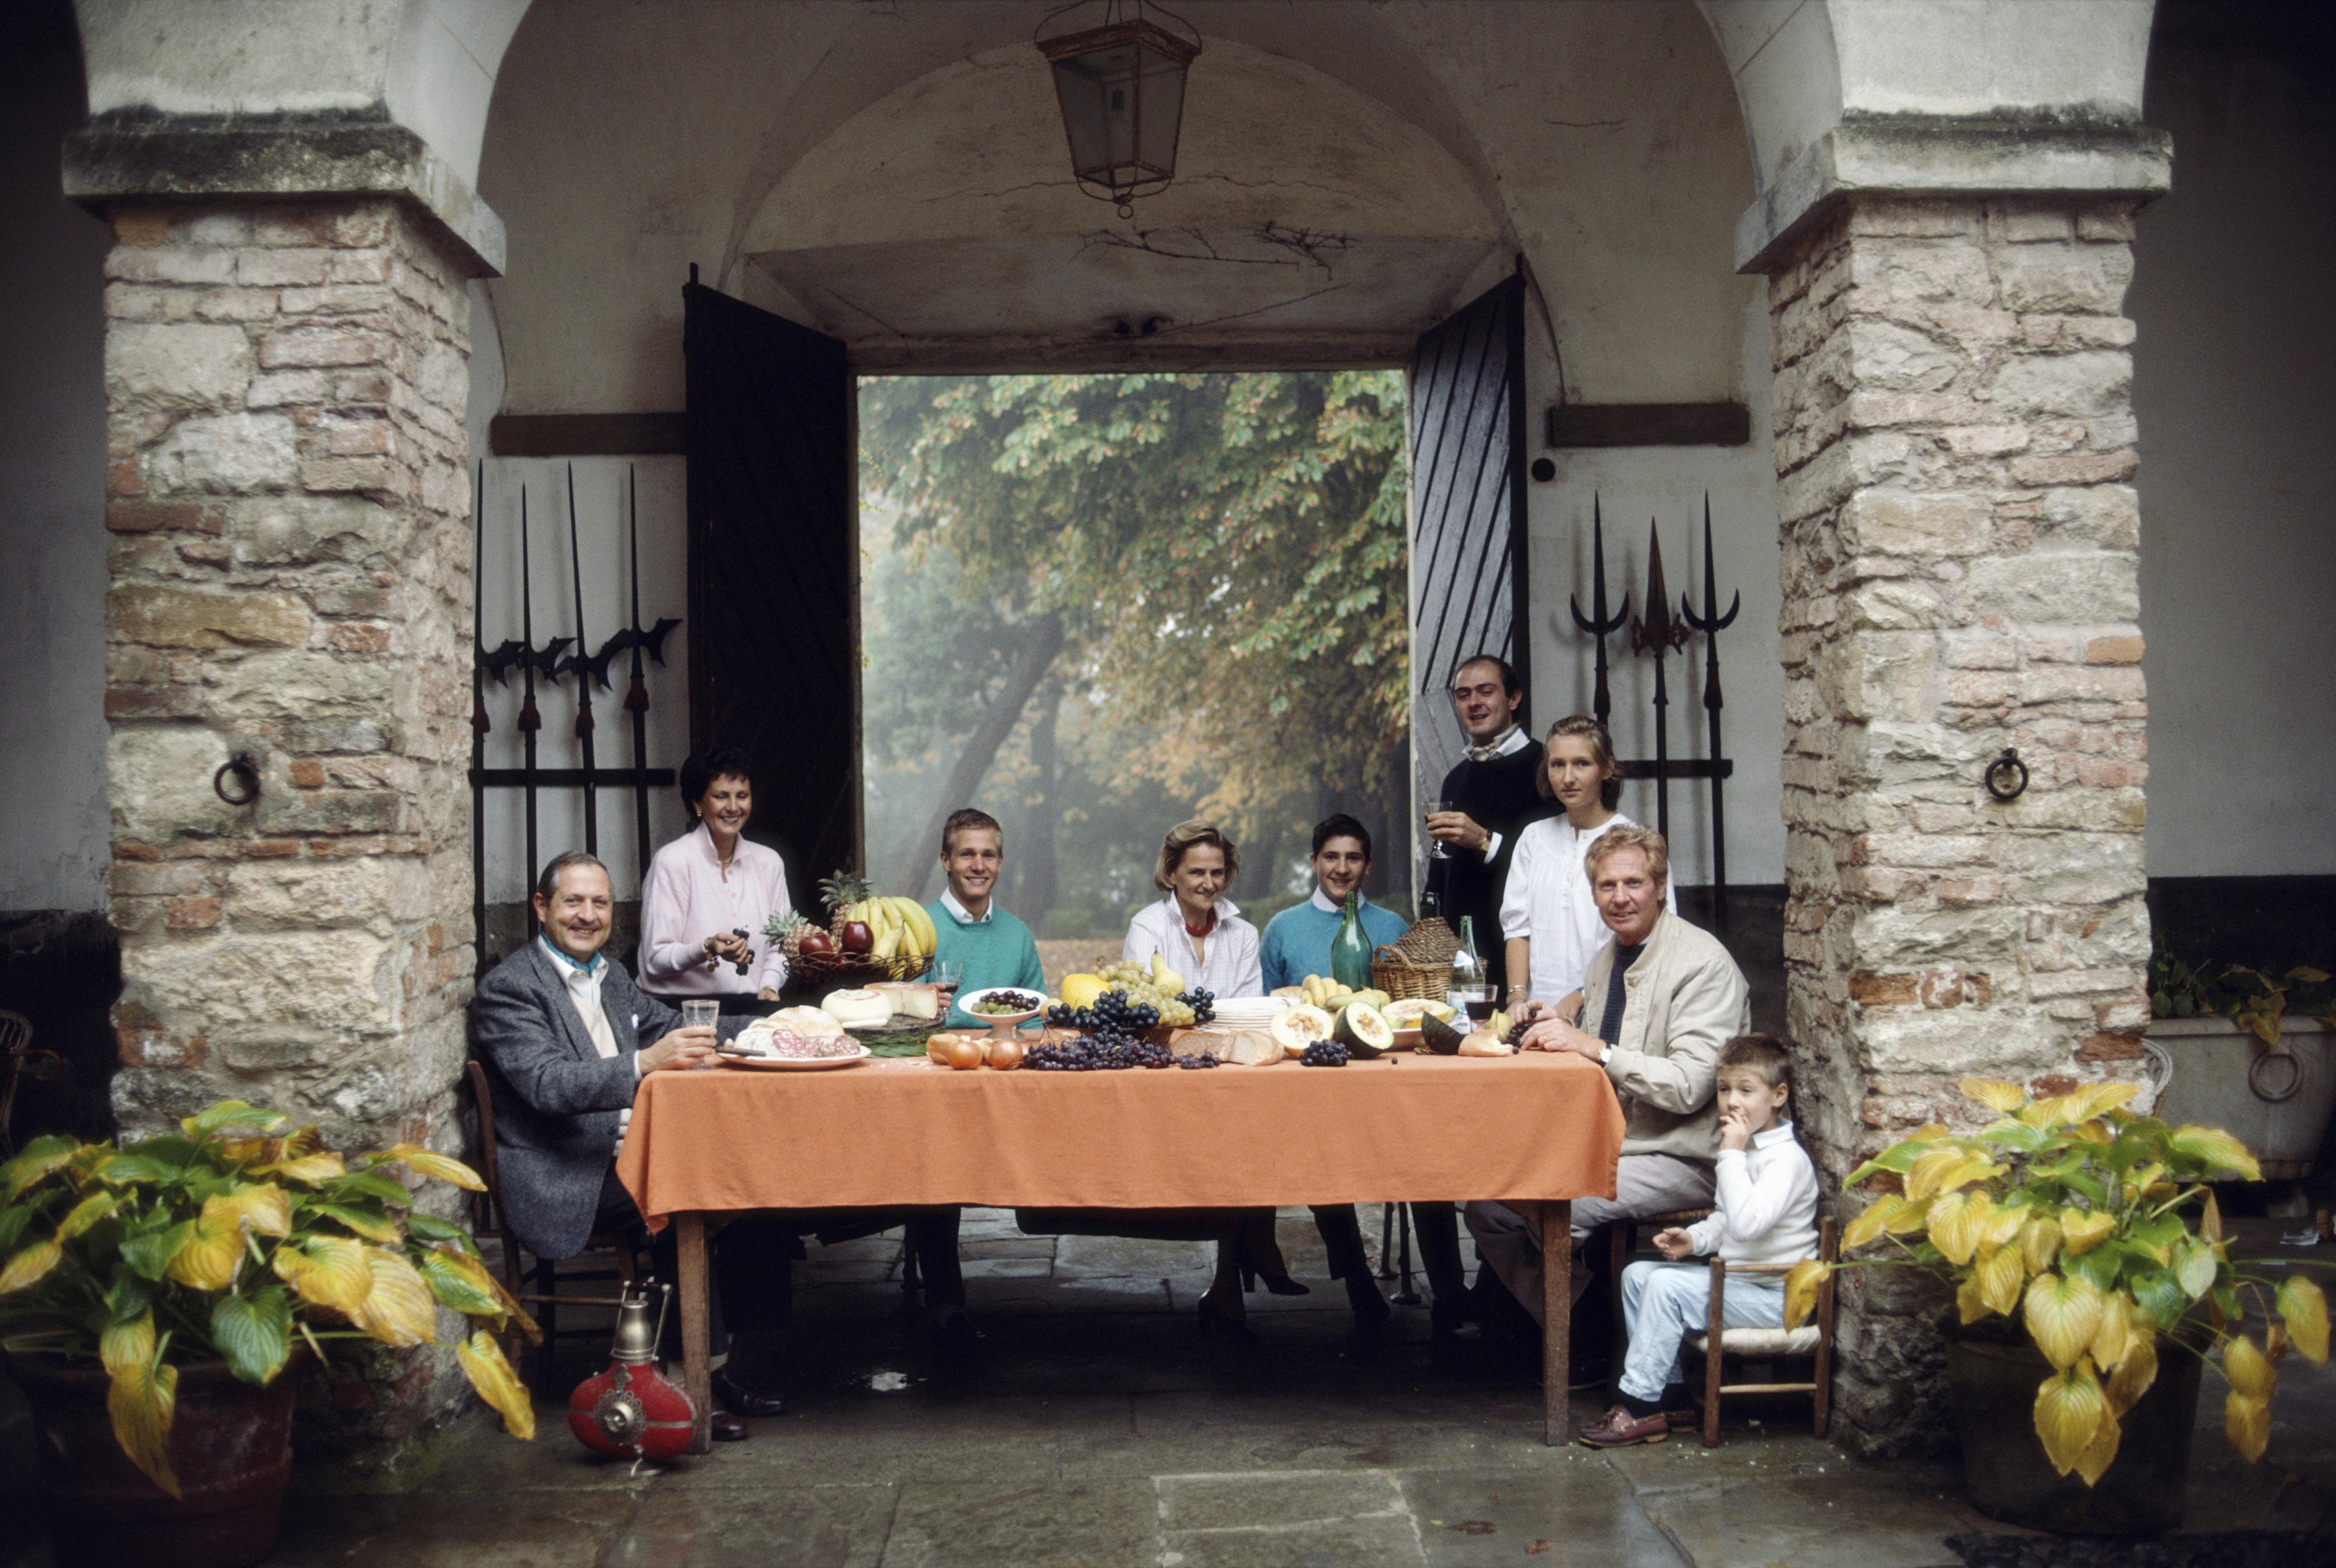 Slim Aarons
Castle Carpeneto
1987
C print
Estate stamped and hand numbered edition of 150 with certificate of authenticity from the estate.   

Marchese Gian Giacomo Chiavari, his wife Enrica , nephew Fabiano, sister-in-lew Elena, his sons Gian Luca